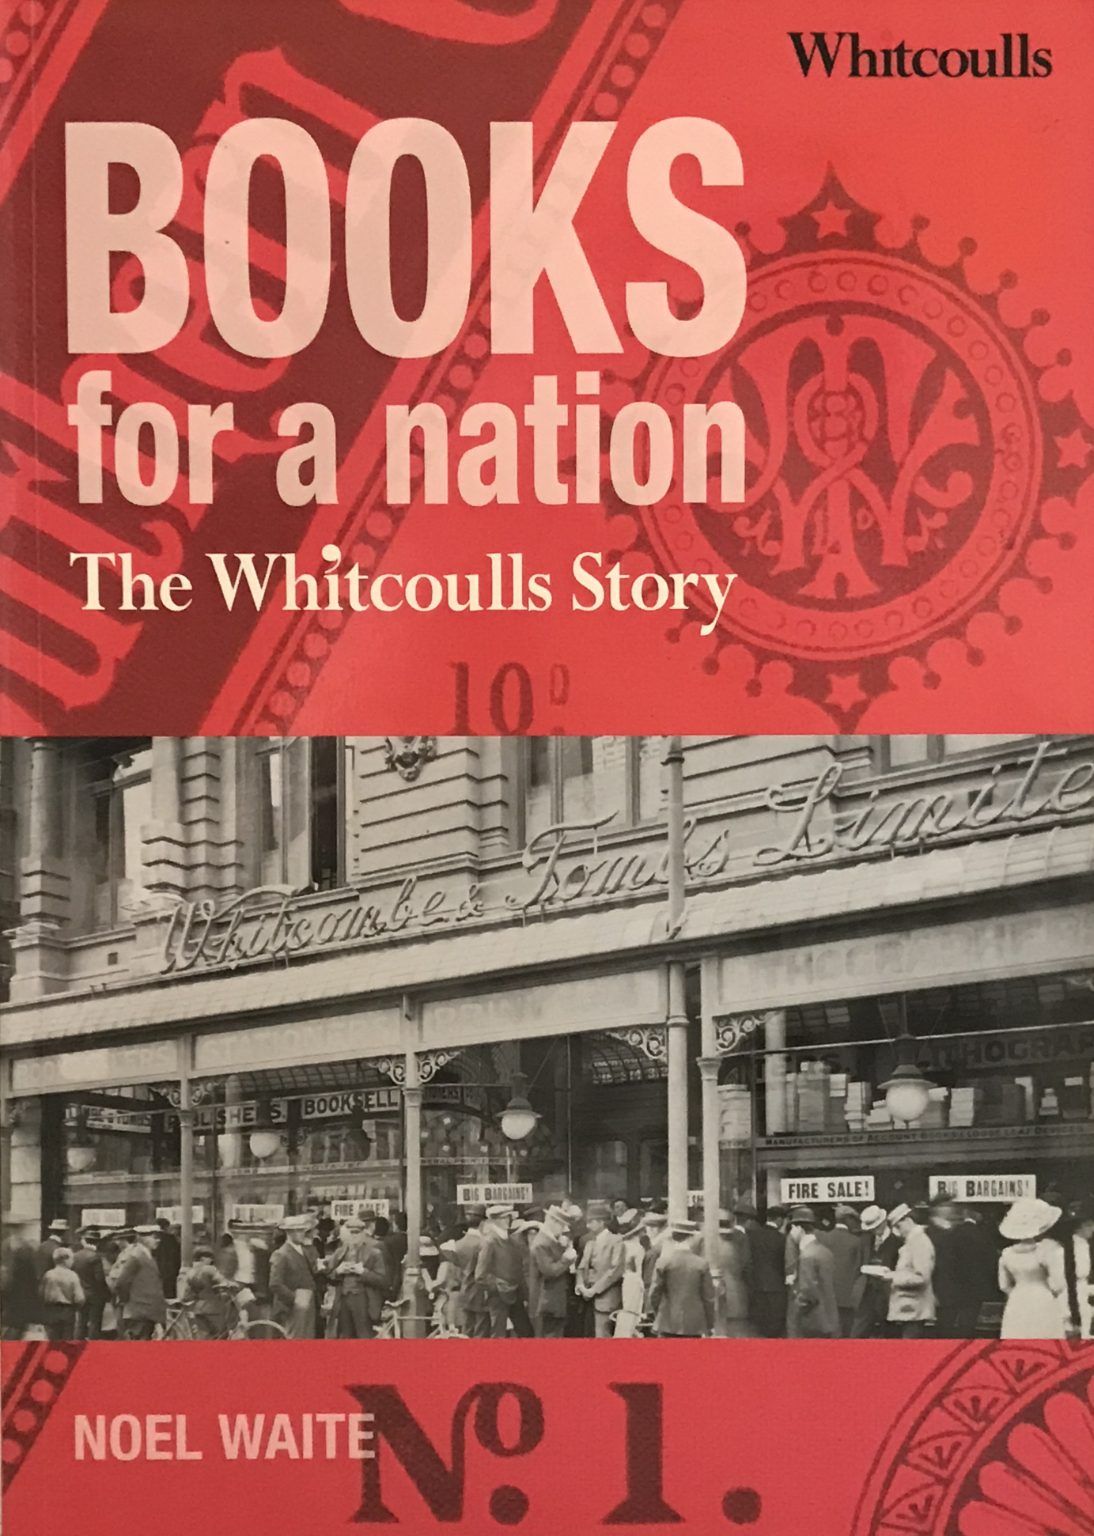 BOOKS FOR A NATION: The Whitcoulls Story